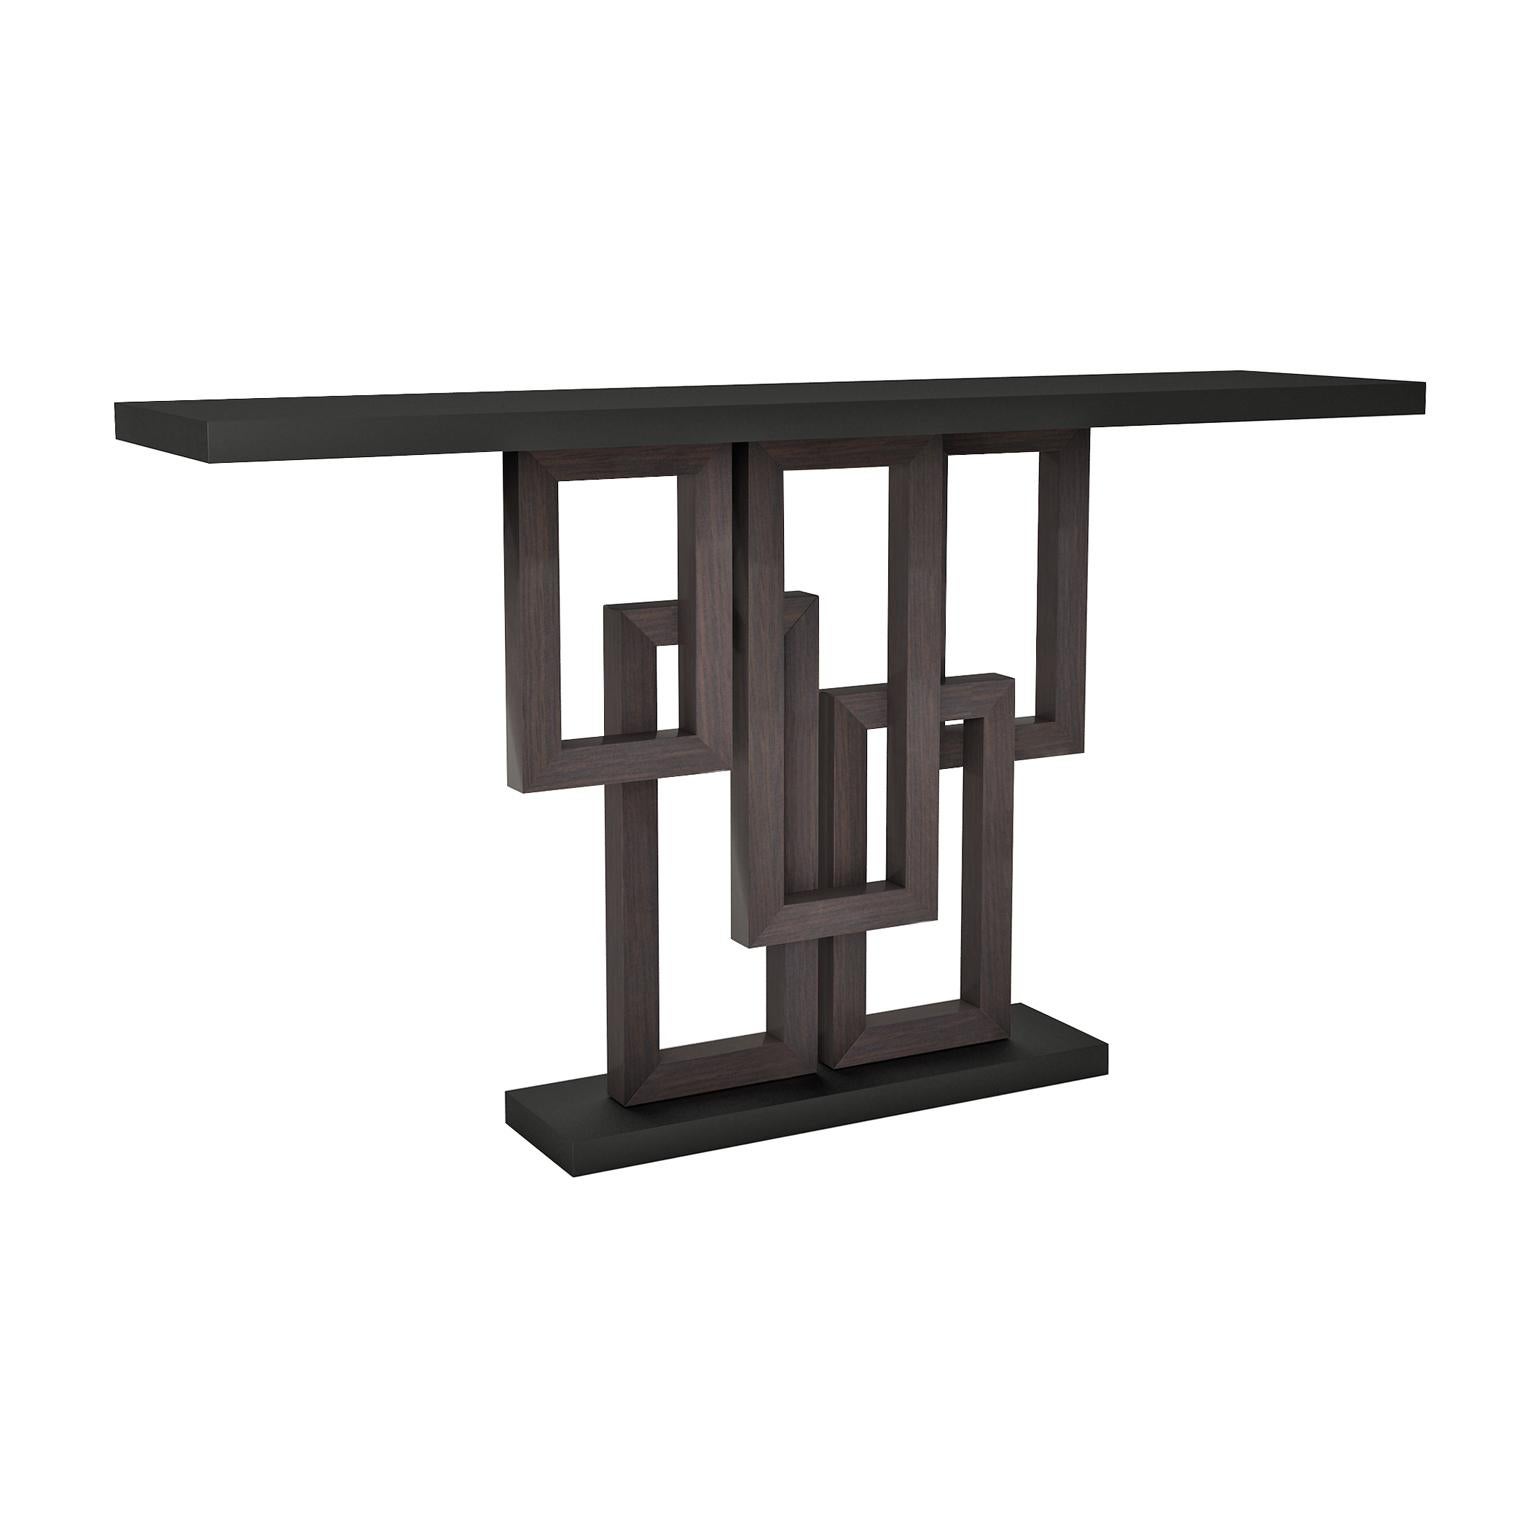 Designed by IC and realized by skillful Italian artisans, the Thomas console features a wood top laying on a stunning geometric base that makes it a stand-out piece that will enrich any decor with sophisticated elegance.
Finish: Matte